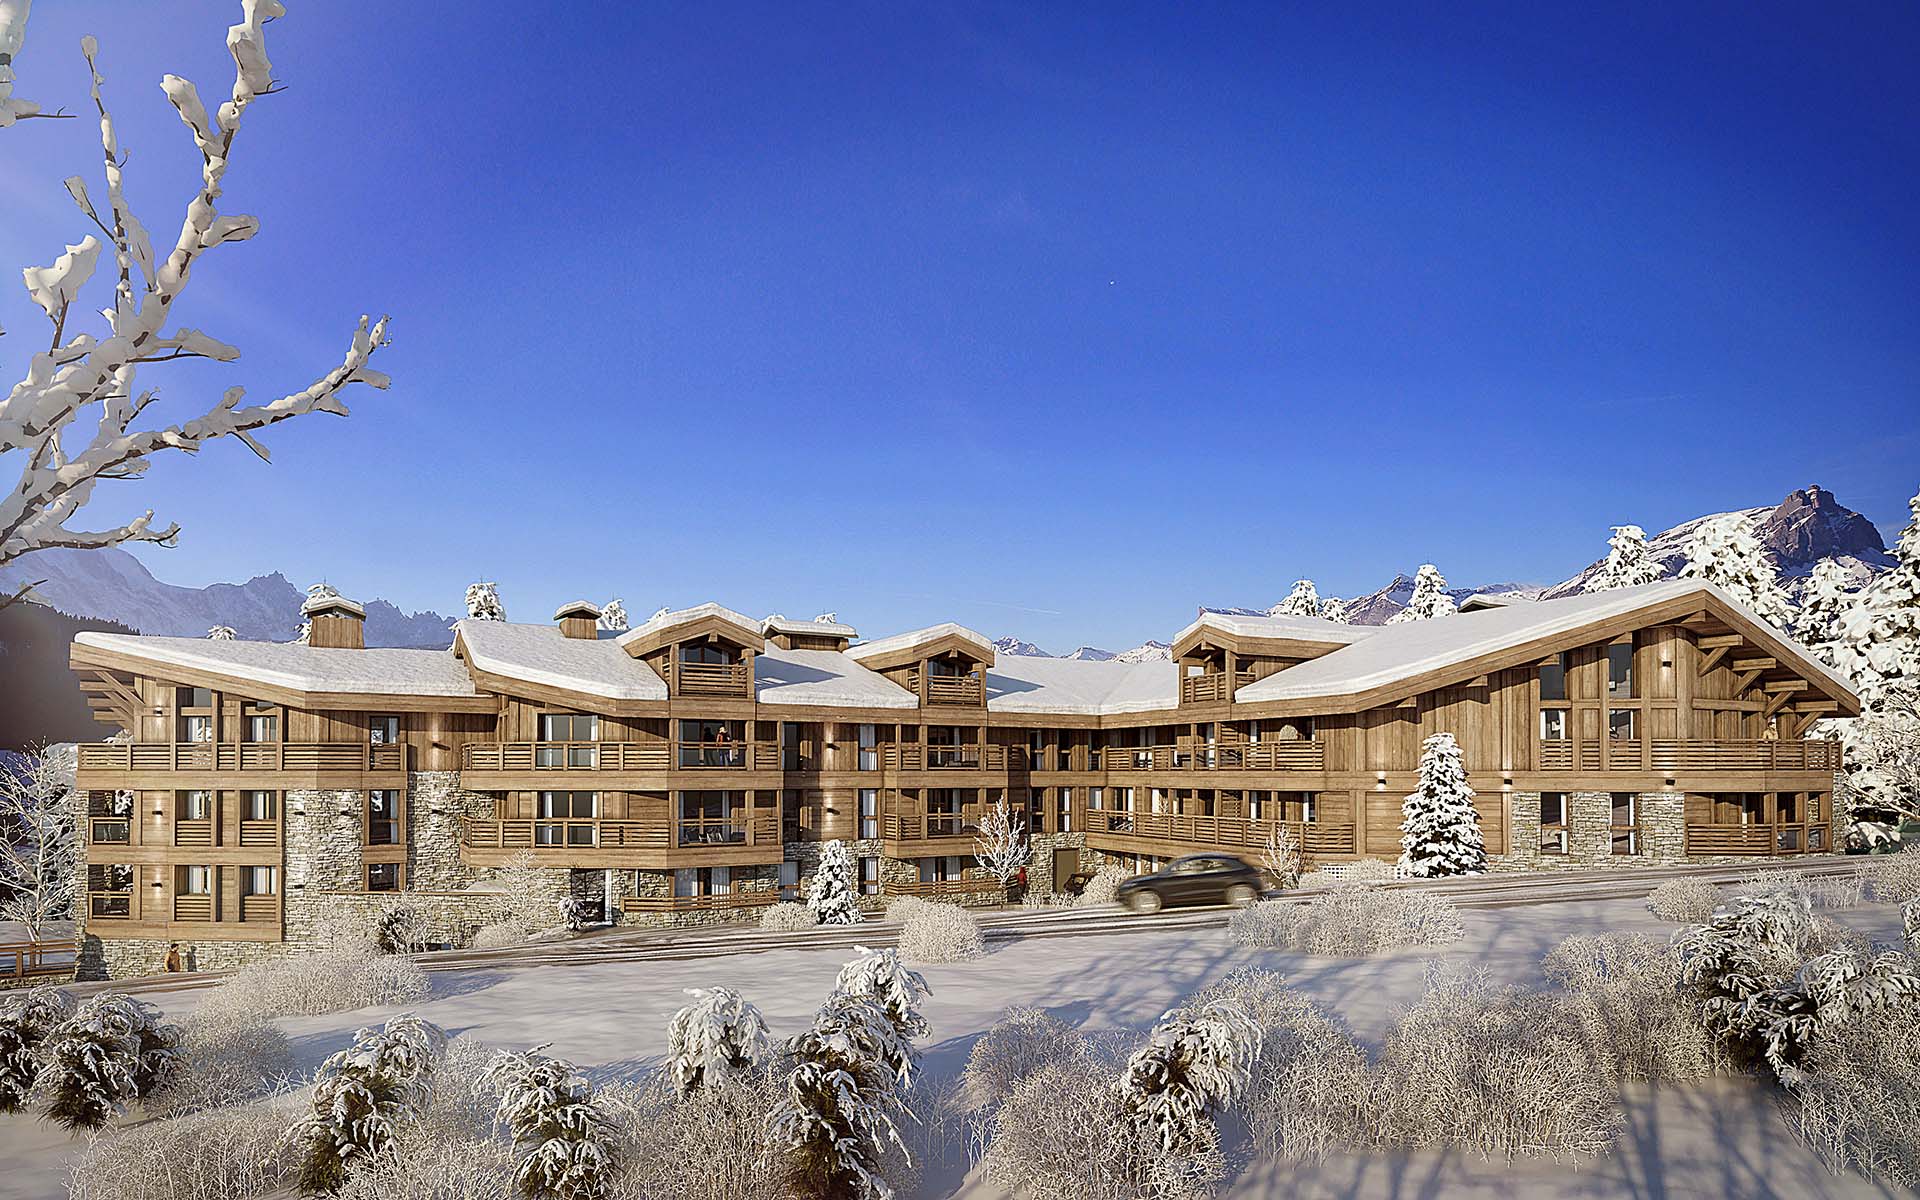 3D Perspective of a real estate project of a luxurious chalet for a private individual.